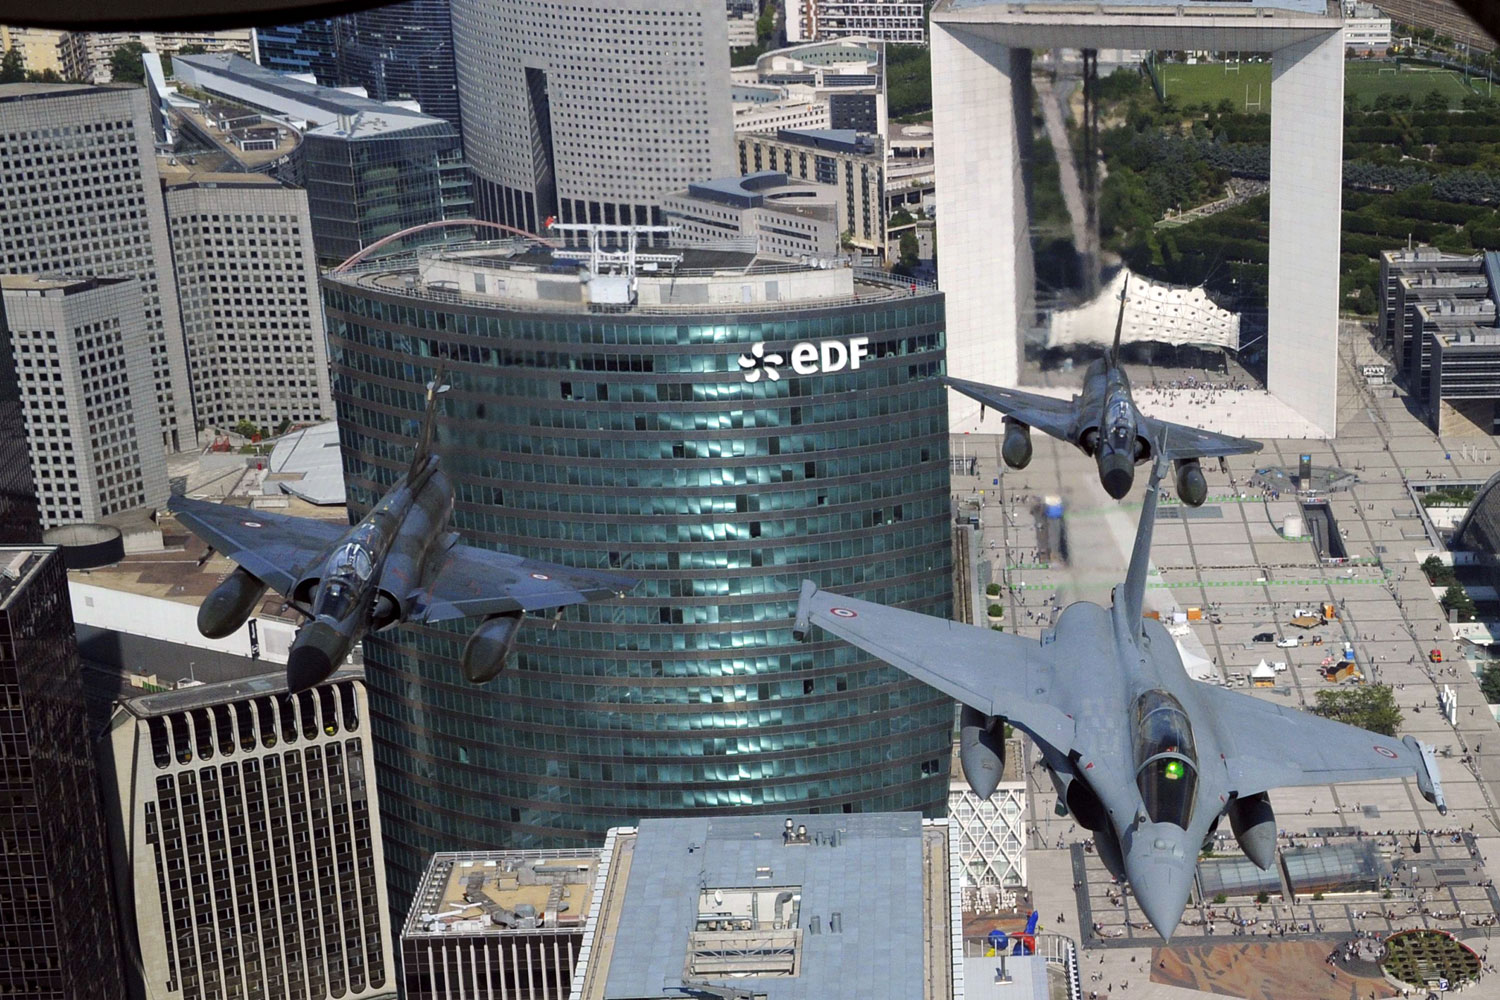 July 14, 2011. A French Rafale jet (R) flanked by two Mirage 2000-N flies over La Defense district, western Paris (background the Arch of La Defense) during the Bastille Day military parade.